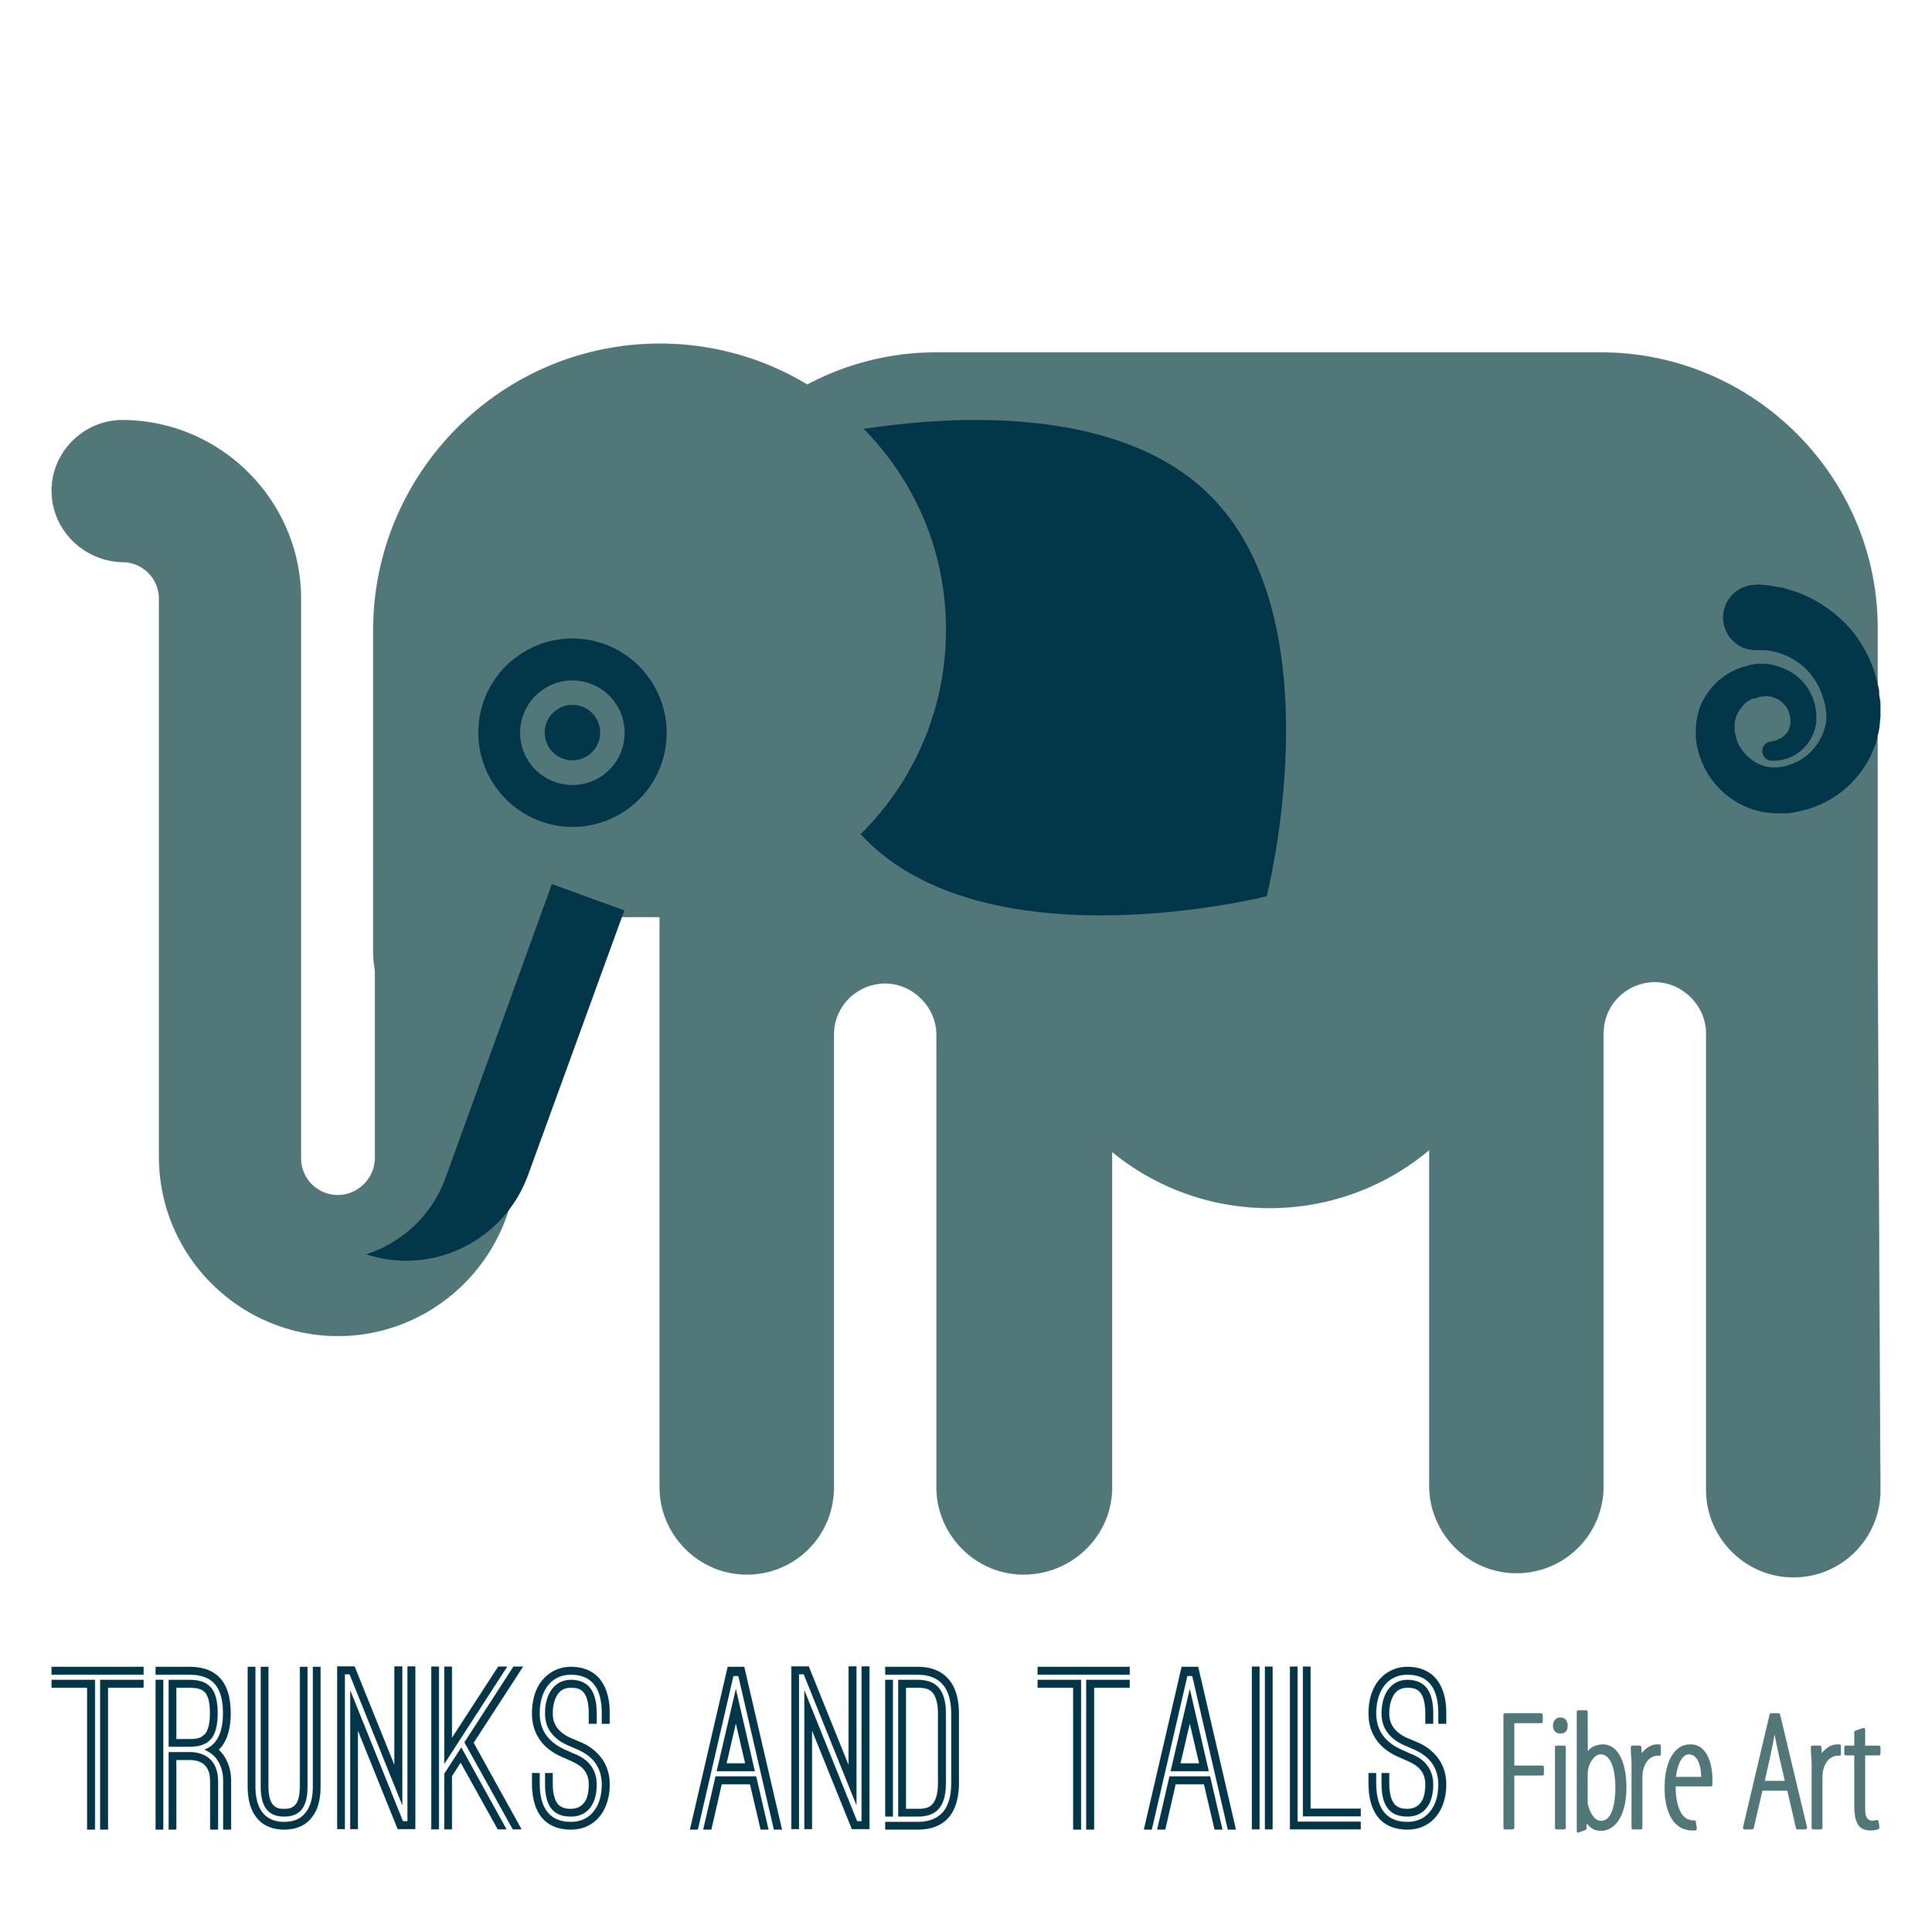 Trunks and Tails. Run by Jonathan Booth